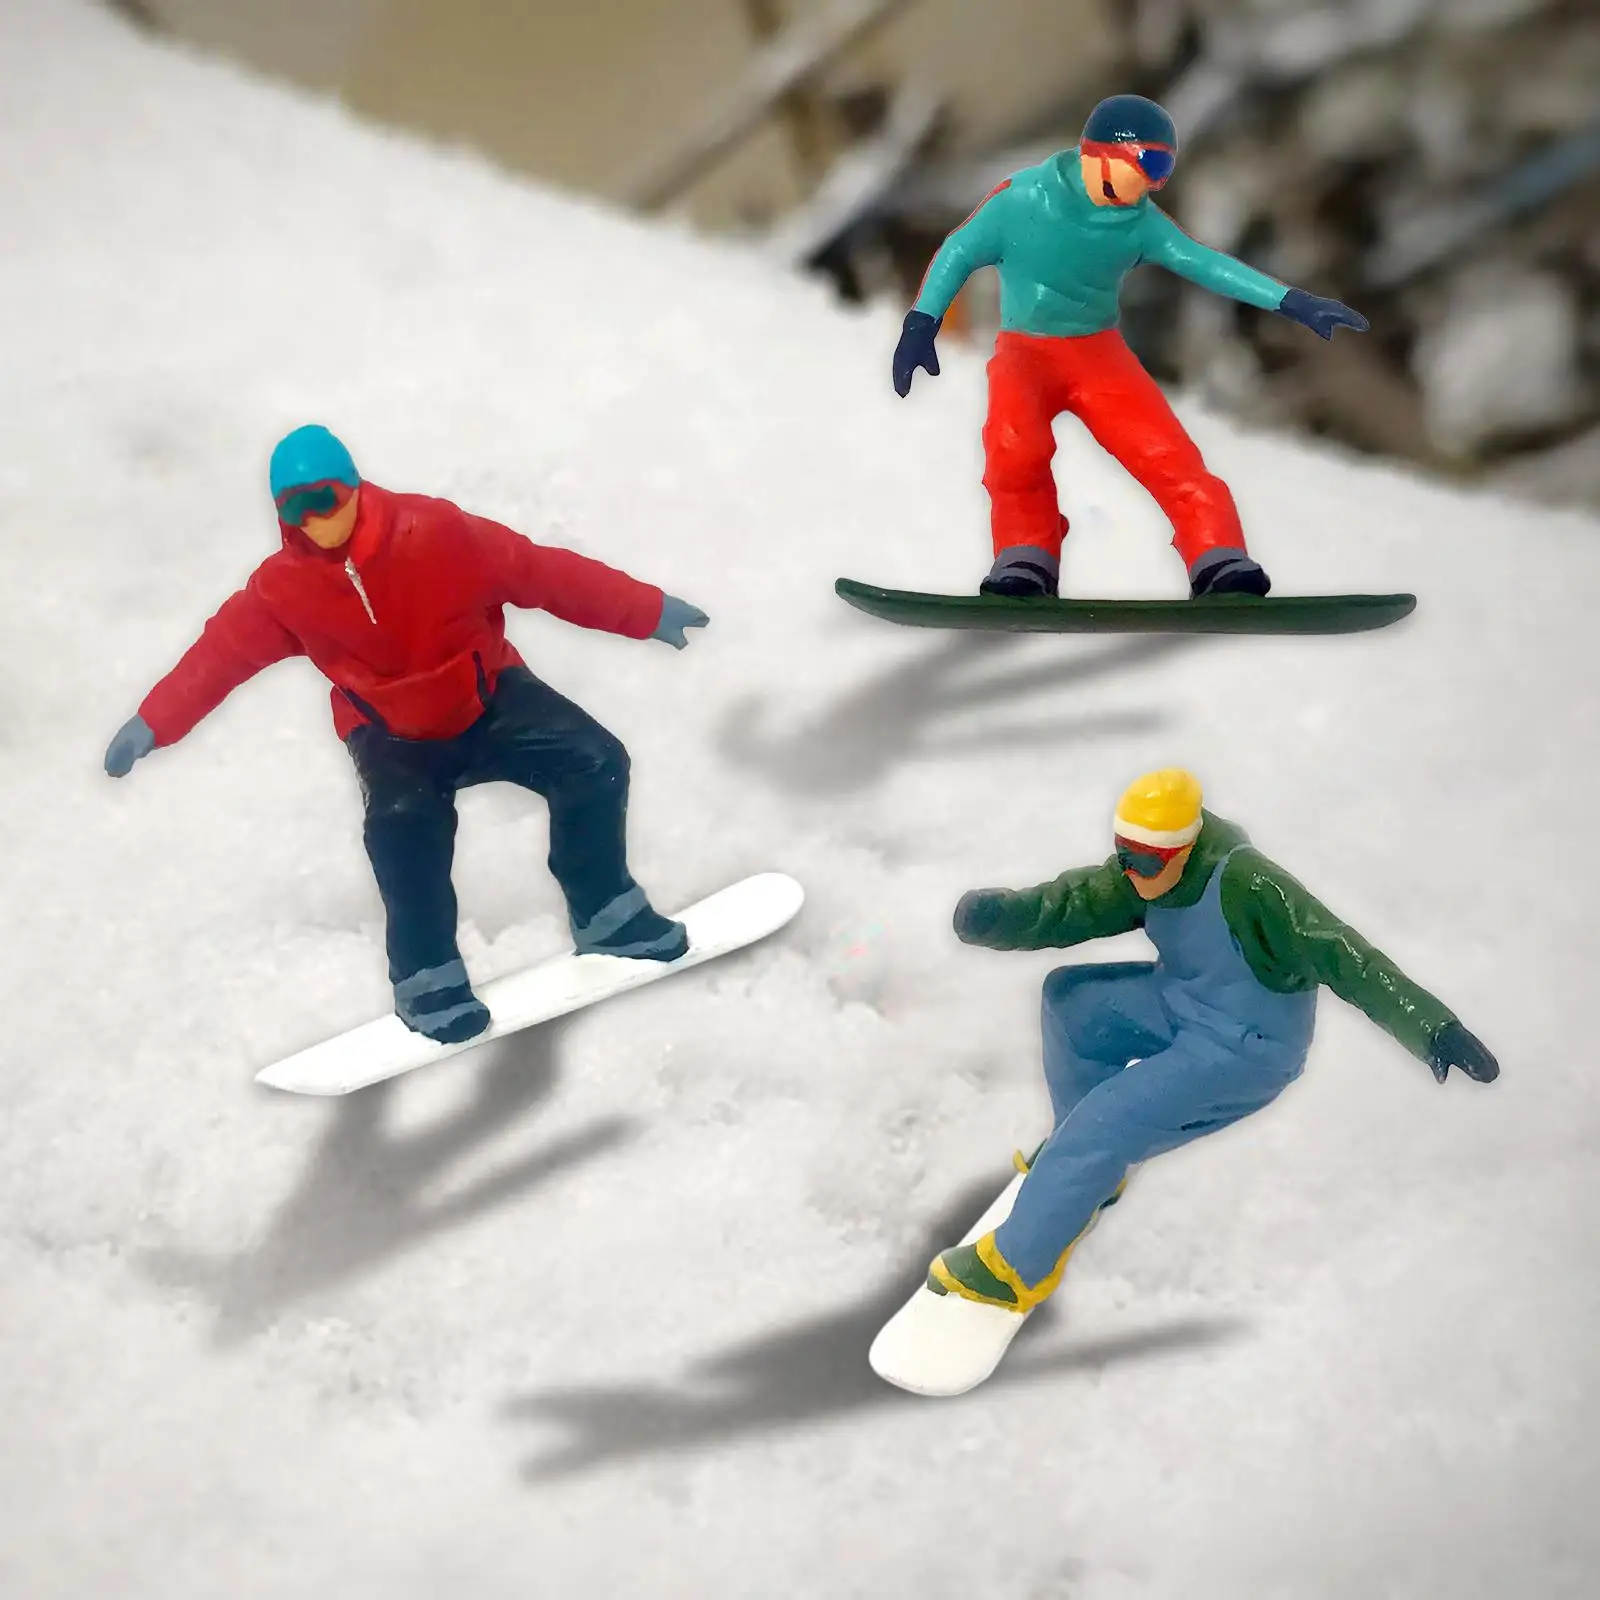 3x HO Scale Miniature Model Skiing Figures Sand Table Scene for 